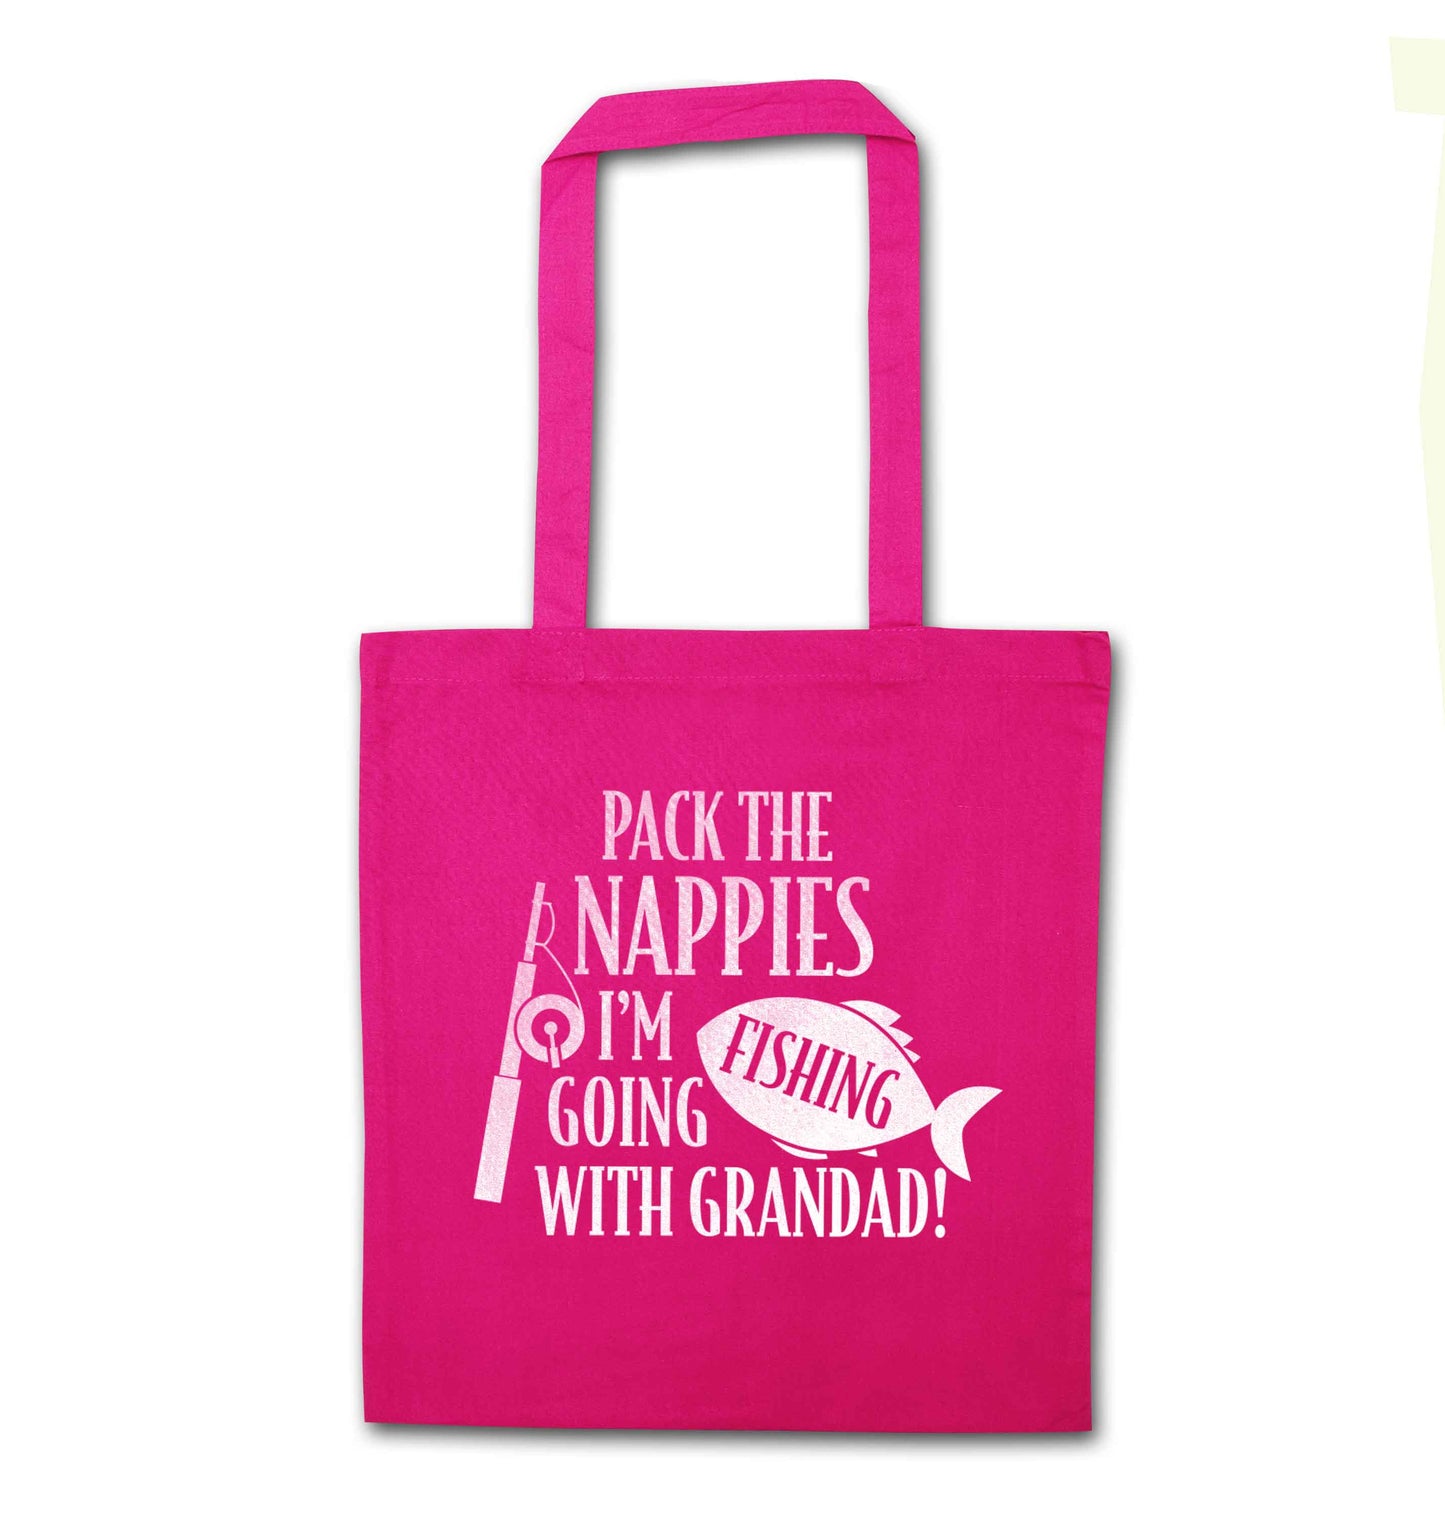 Pack the nappies I'm going fishing with Grandad pink tote bag